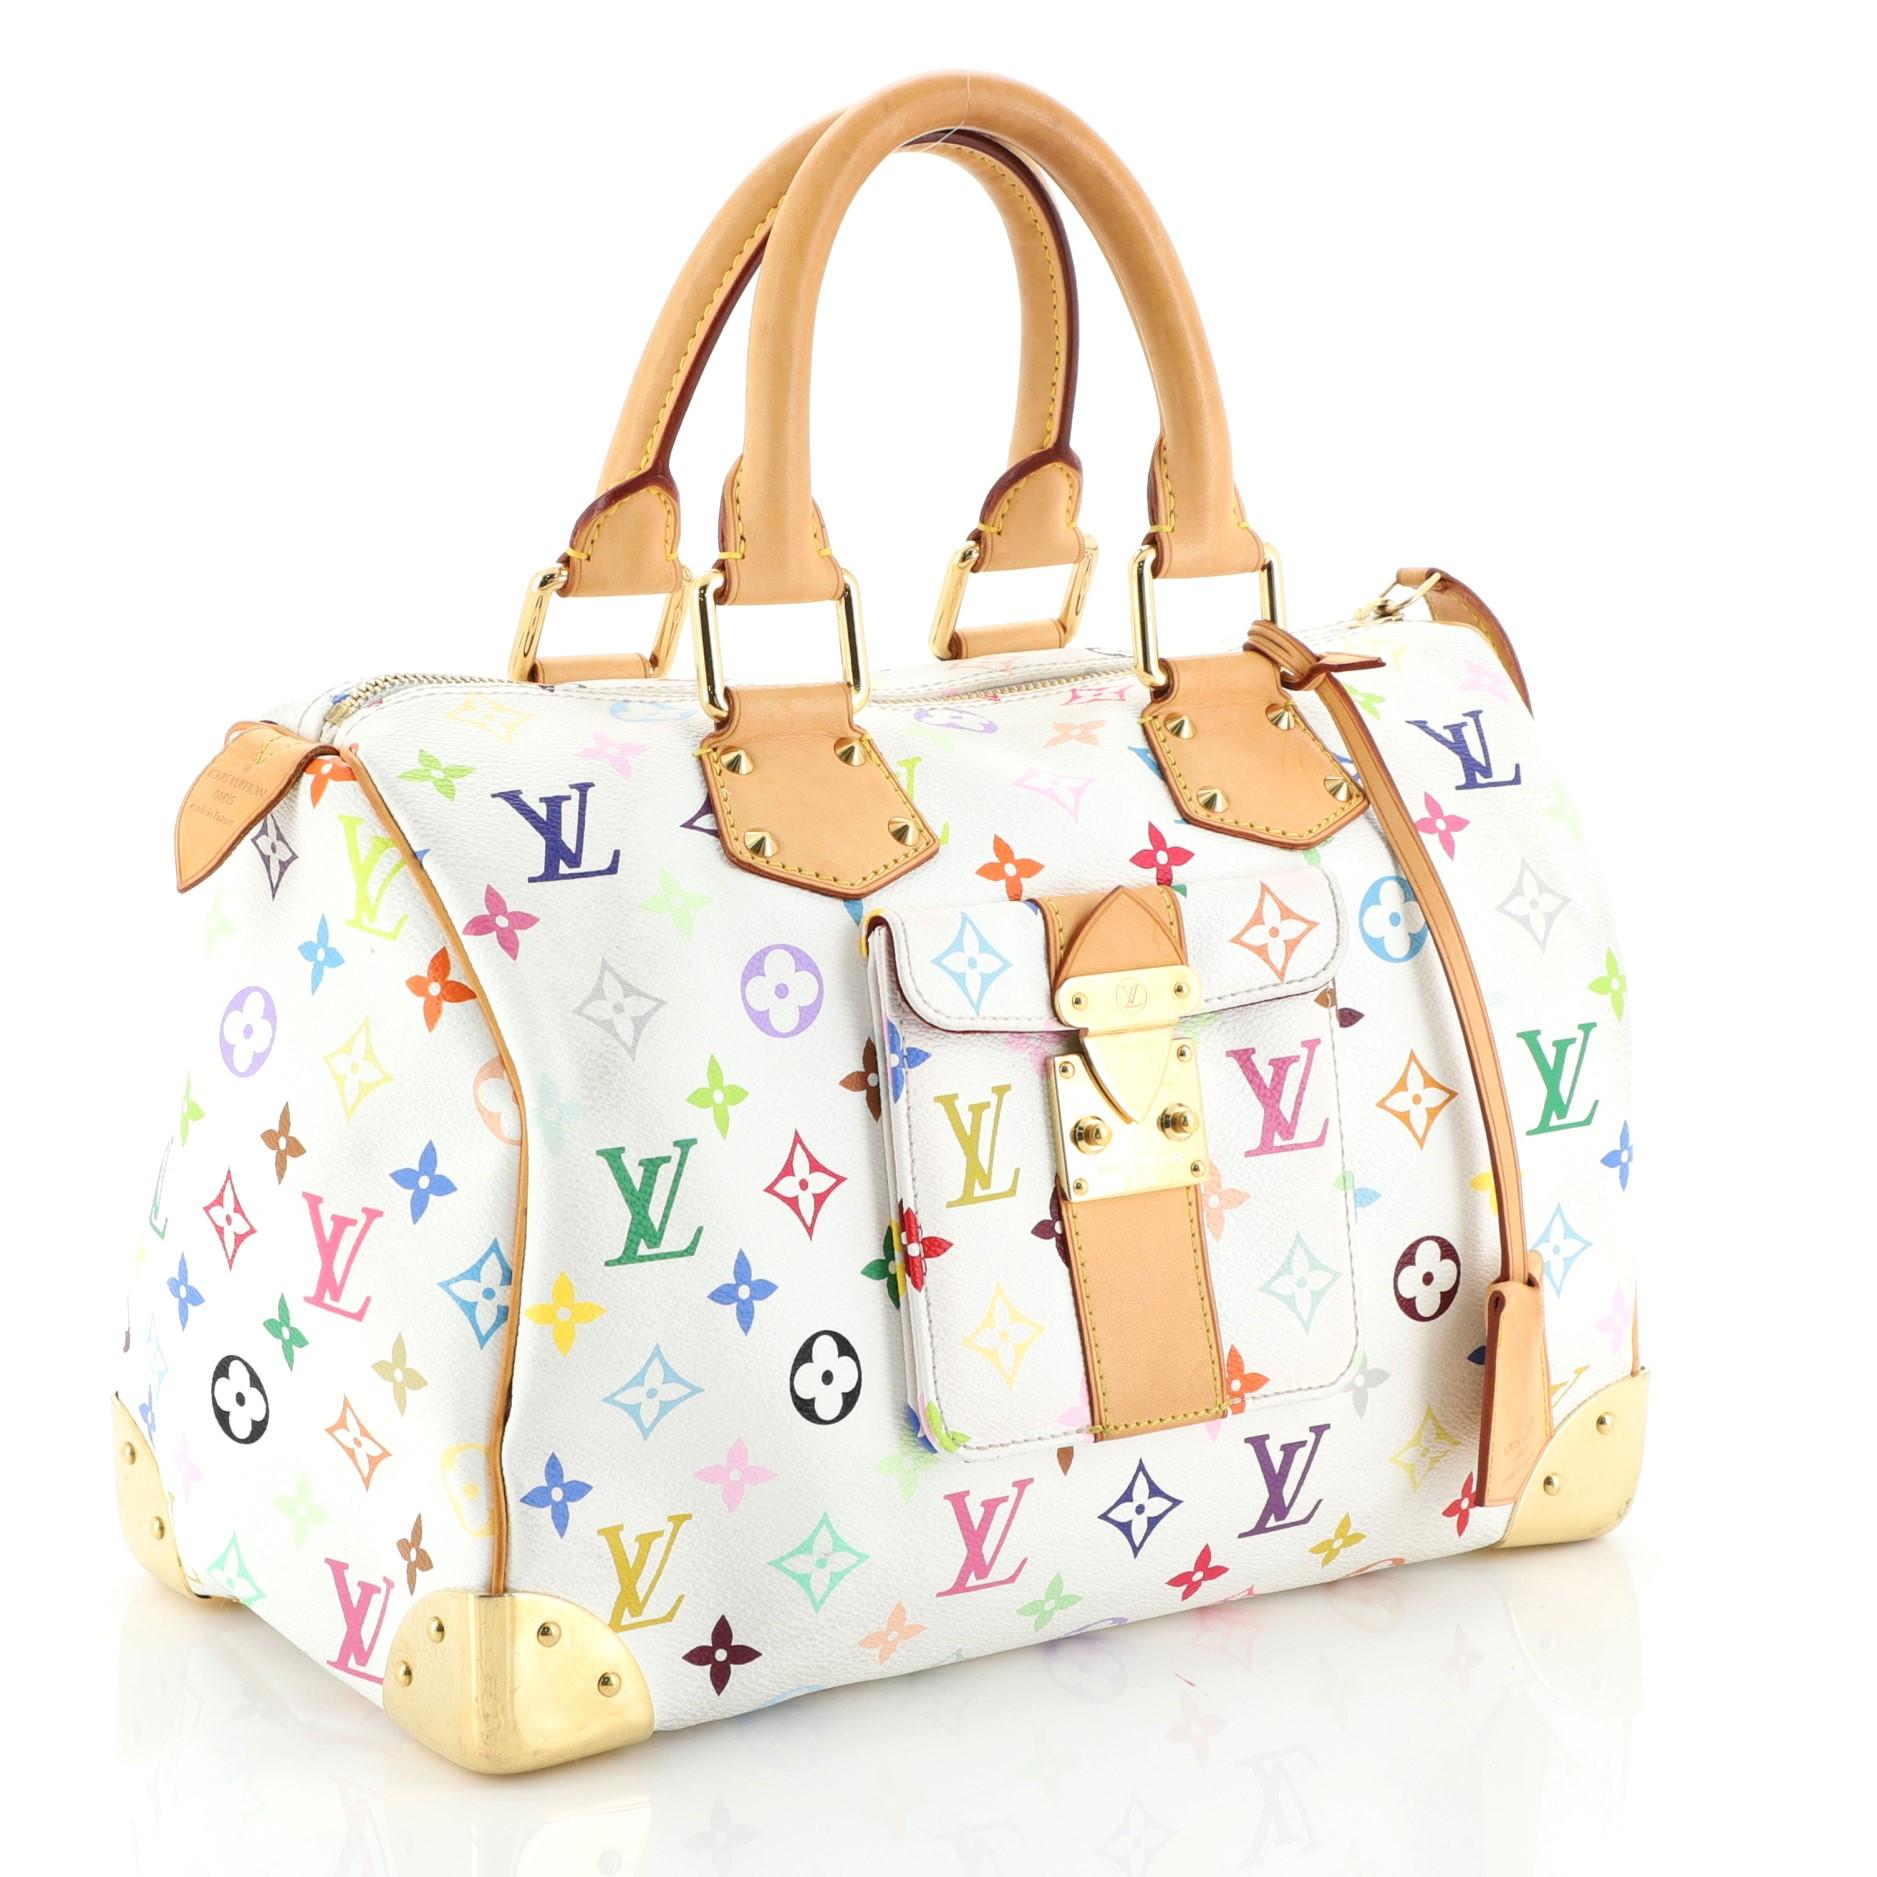 This Louis Vuitton Speedy Handbag Monogram Multicolor 30, crafted from white monogram multicolor coated canvas, features dual rolled vachetta handles, front flap pocket with S-lock closure, and gold-tone hardware. Its top zip closure opens to a red